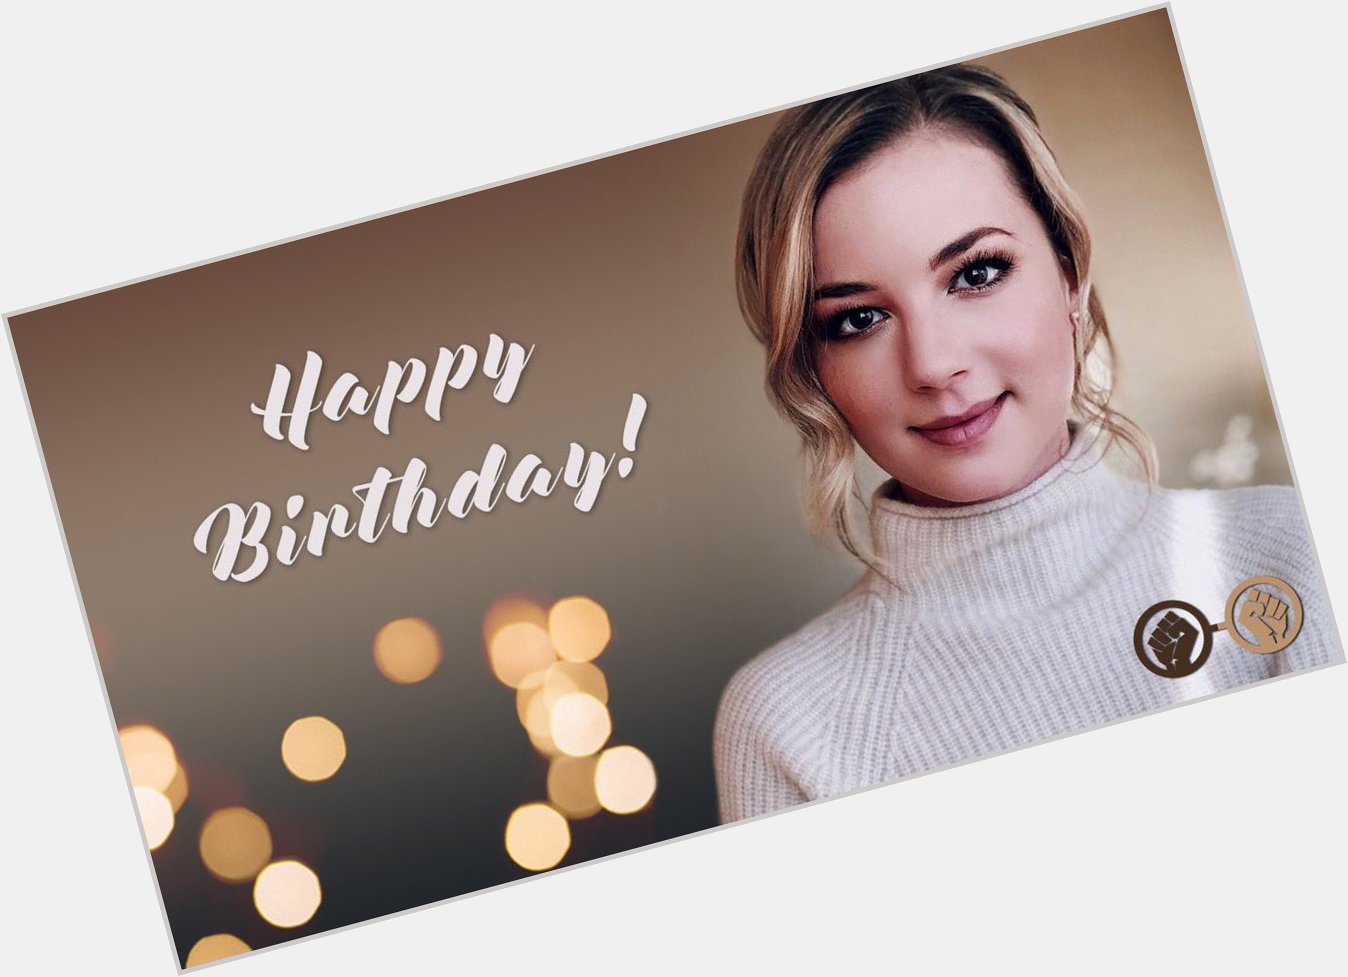 Happy birthday, Emily VanCamp! Our Agent 13 a.k.a Sharon Carter turns 32 today! 